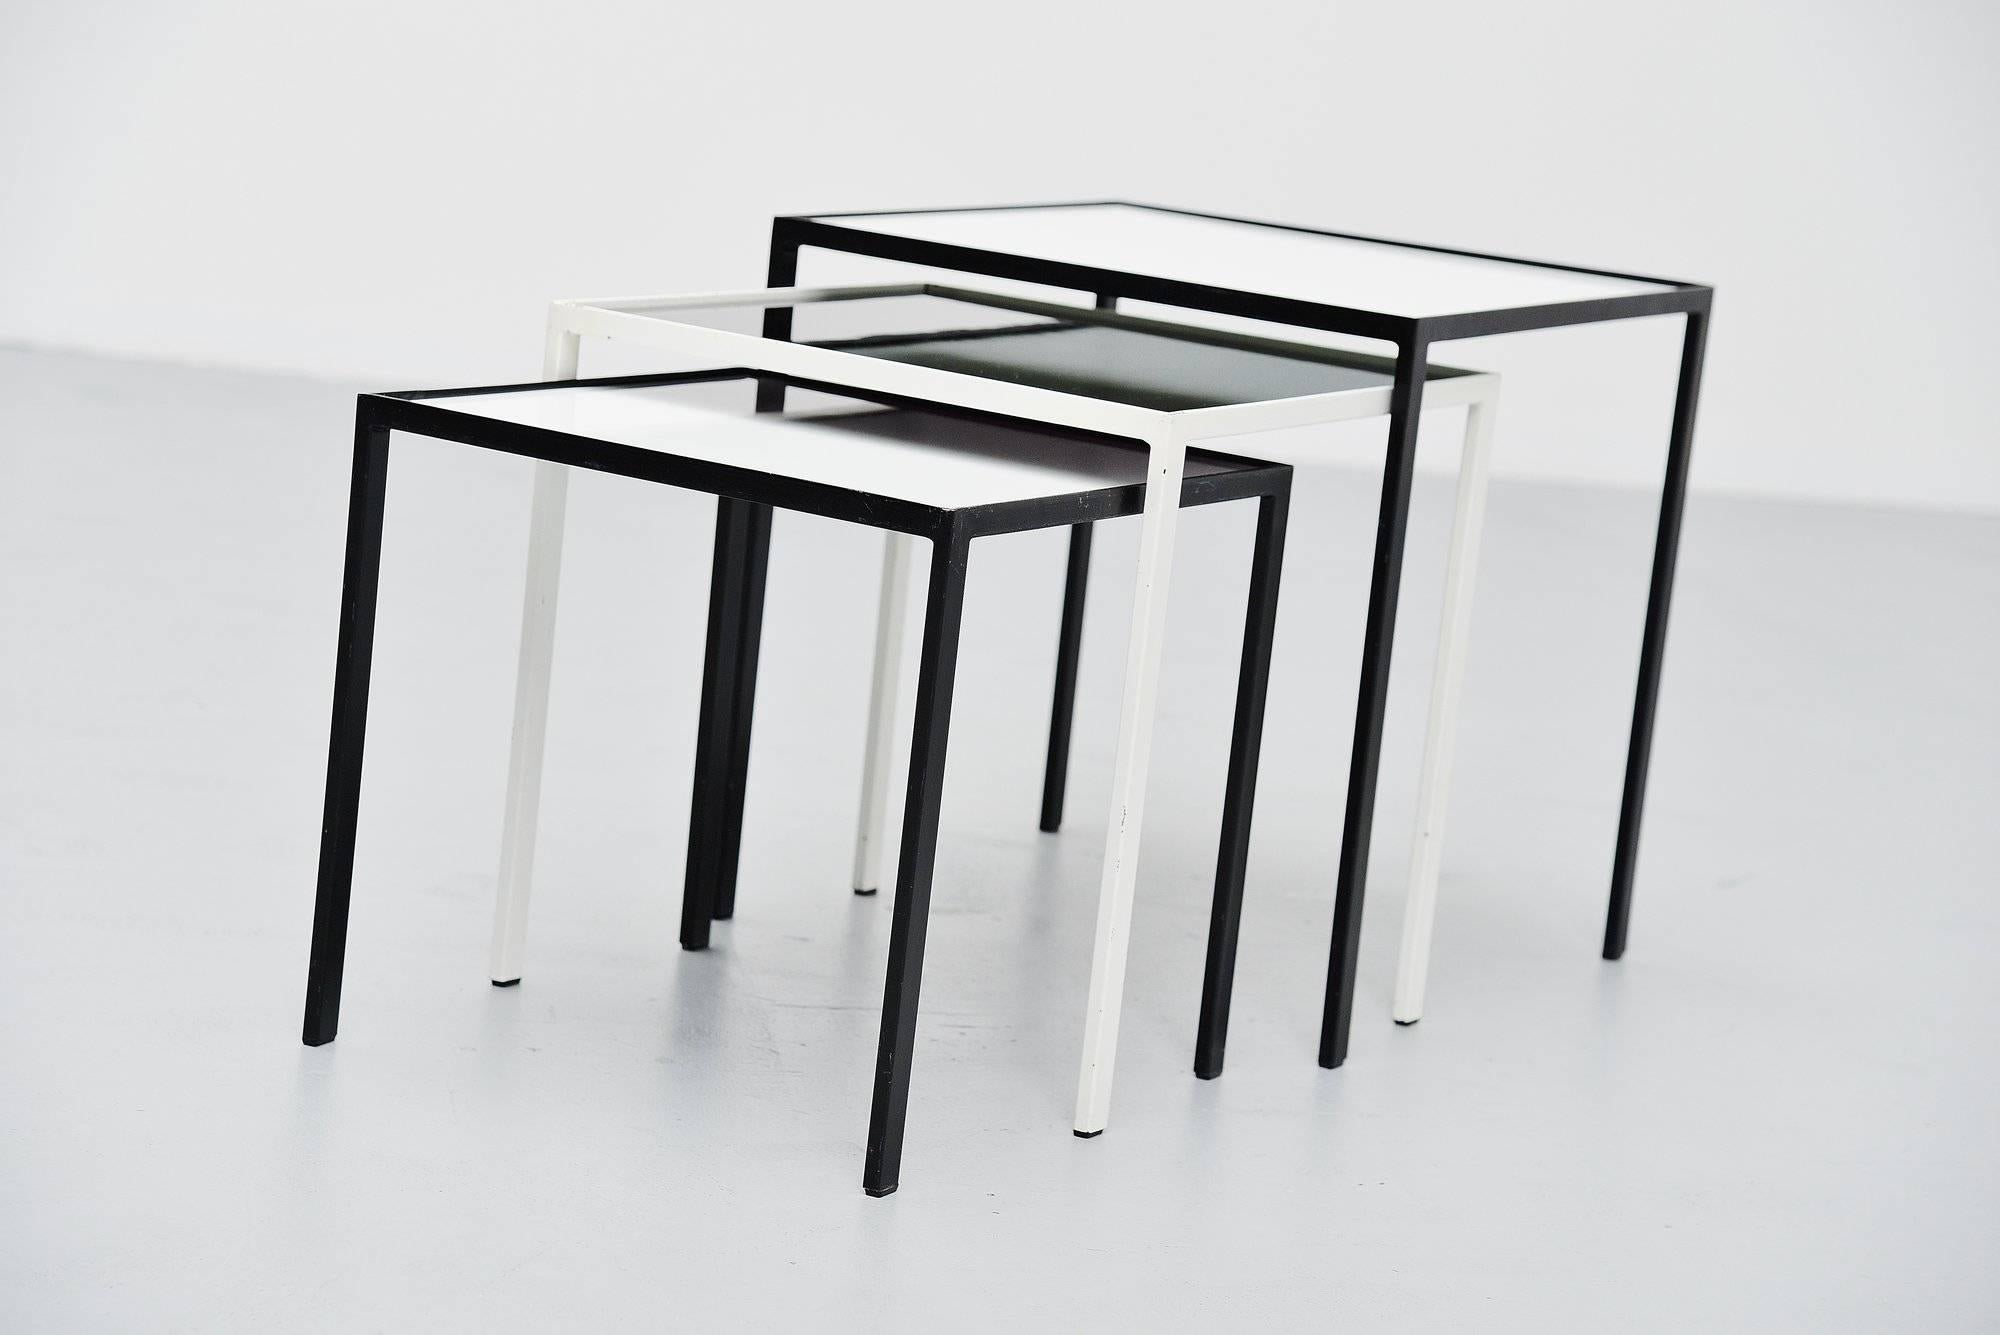 Very nice set of nesting table designed by Floris Fiedeldij and manufactured by Artimeta Soest, Holland, 1960. The tables have black and white painted metal frames and black and white glass tops. The glass tops have minor wear from age and usage but